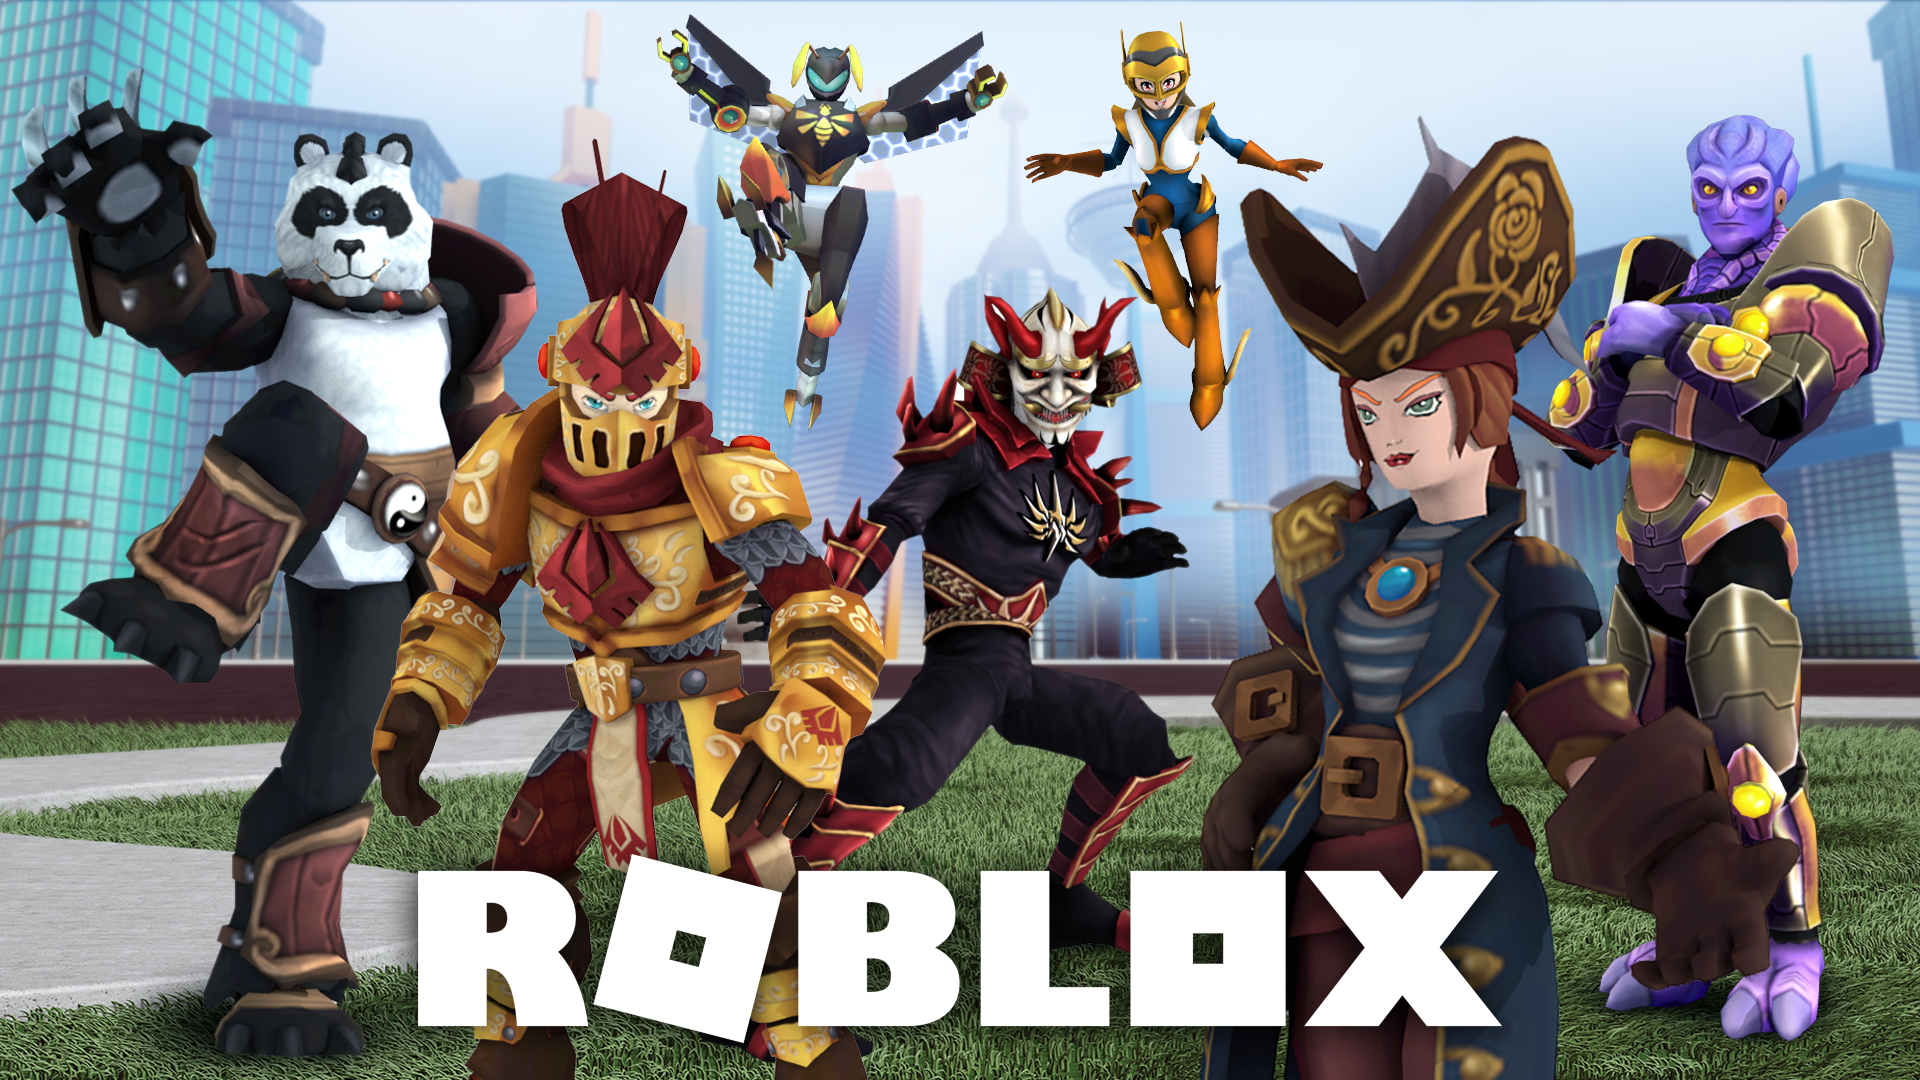 Game Design With Roblox For Kids Code For Fun - how to create team clothes on roblox studios